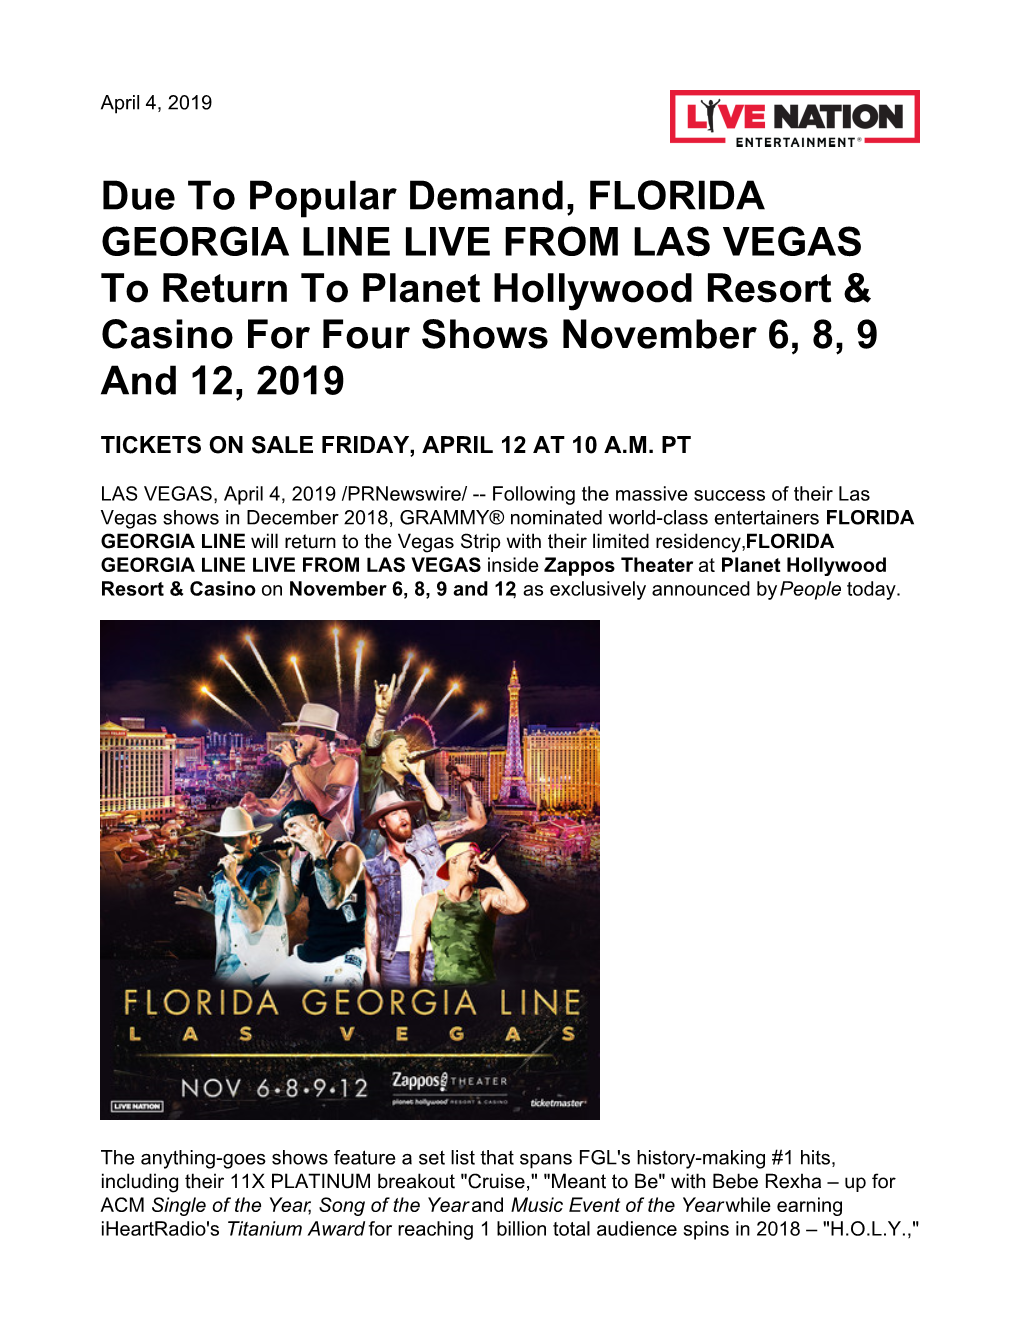 Due to Popular Demand, FLORIDA GEORGIA LINE LIVE from LAS VEGAS to Return to Planet Hollywood Resort & Casino for Four Shows November 6, 8, 9 and 12, 2019